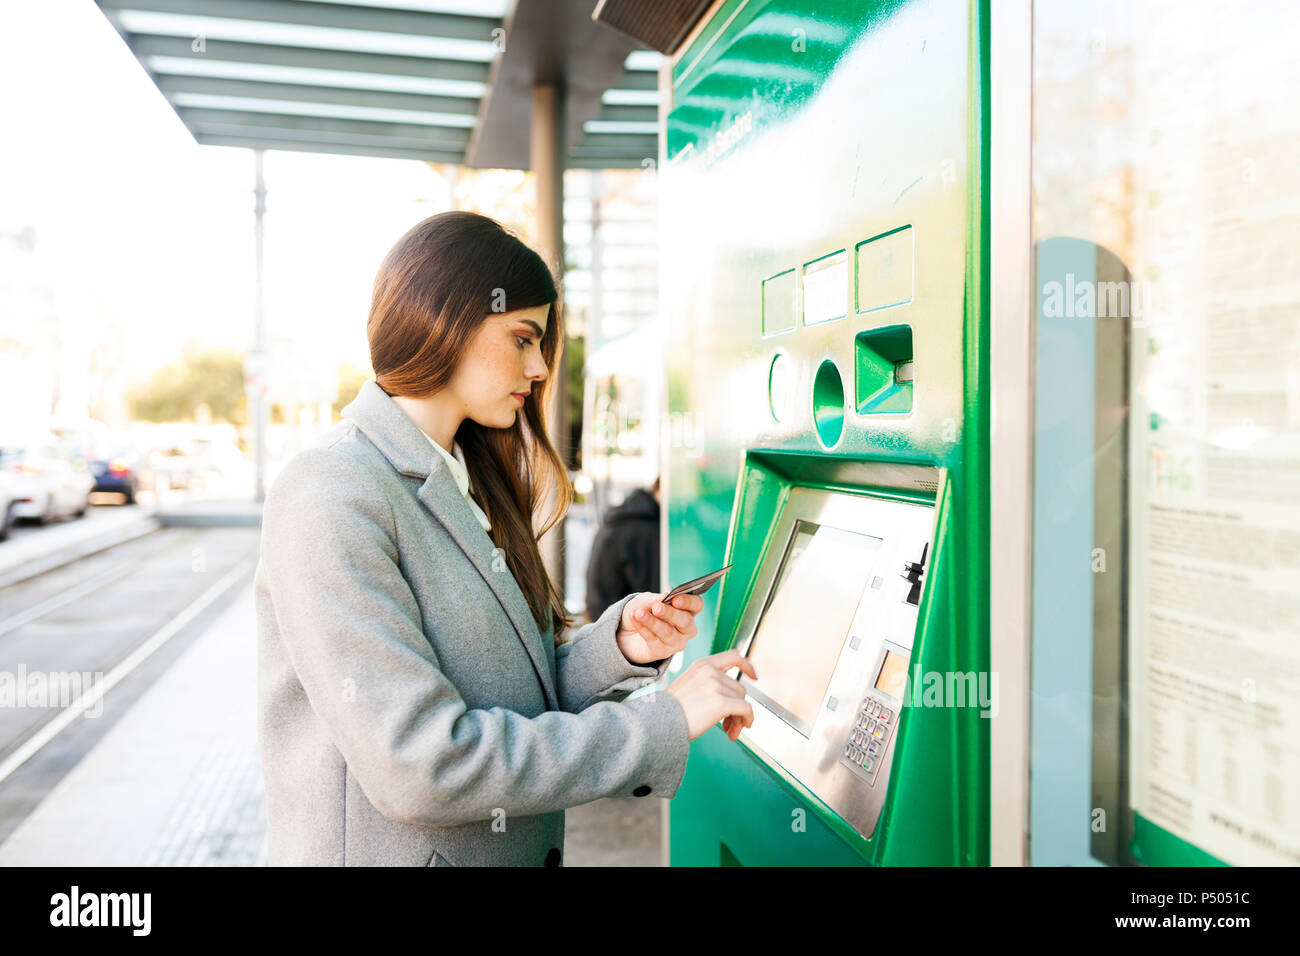 Spain, Barcelona, woman buying ticket from automated machine at  station Stock Photo